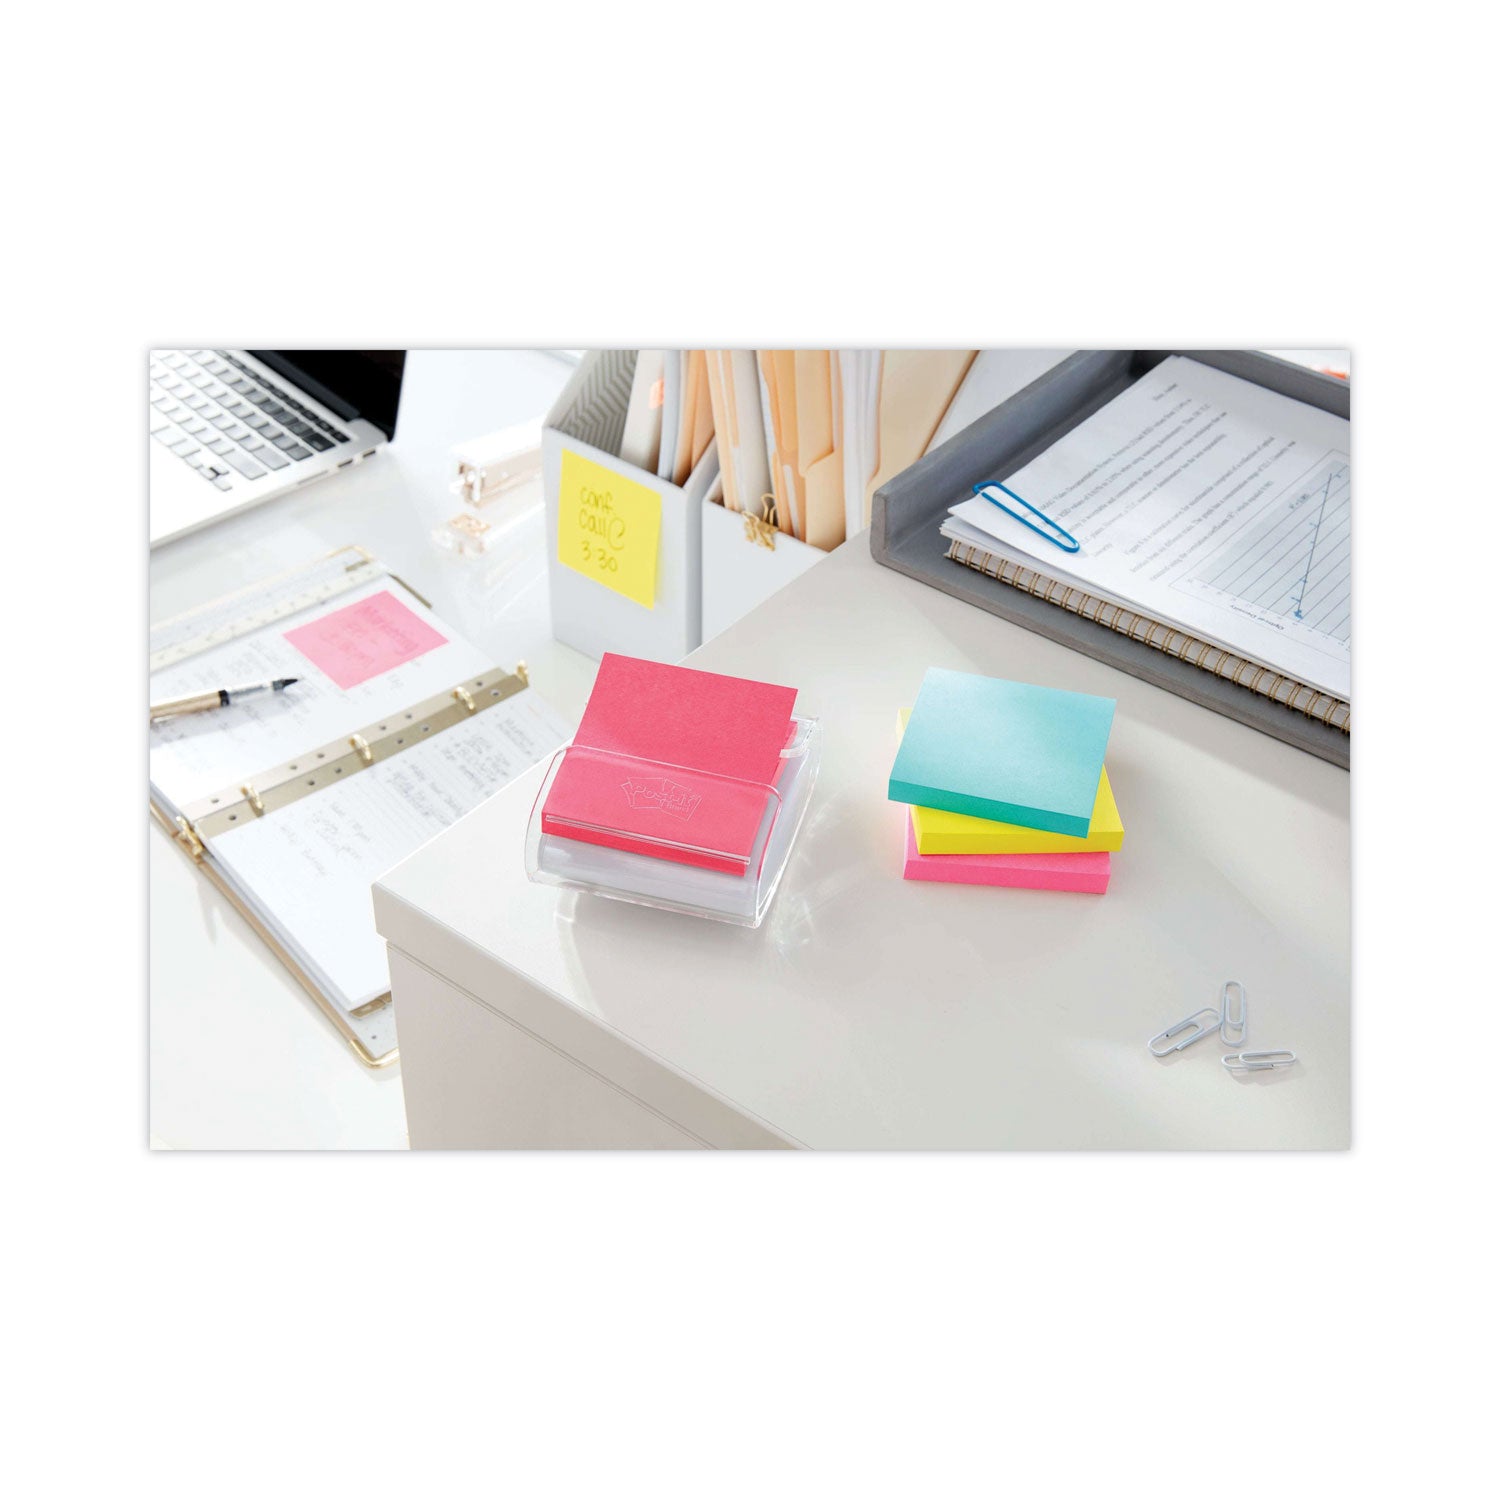 pop-up-3-x-3-note-refill-3-x-3-supernova-neons-collection-colors-90-sheets-pad-10-pads-pack_mmmr33010ssmia - 7